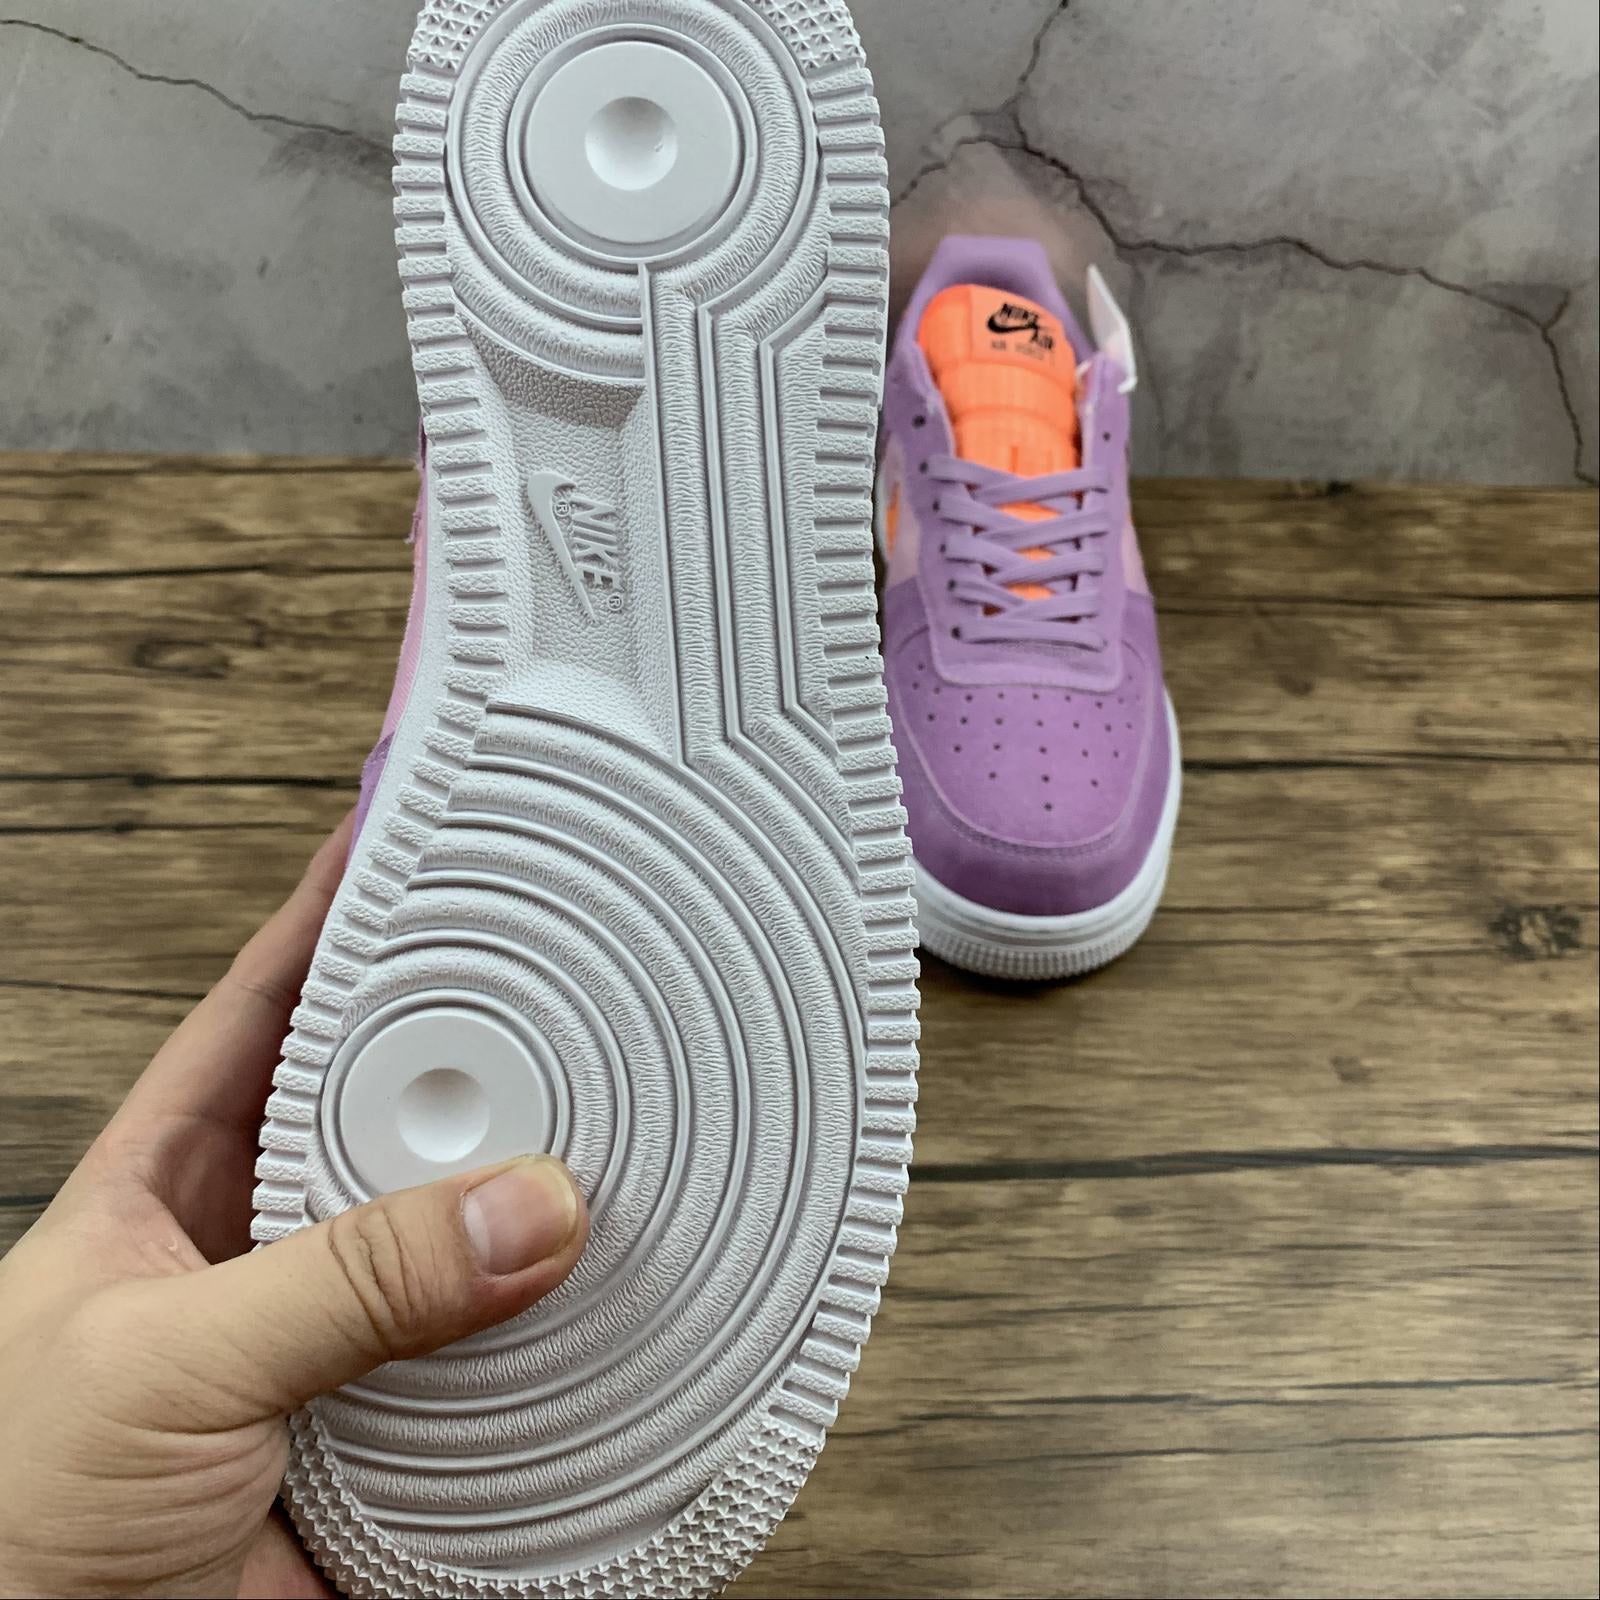 Tuhz Nike Air Force 1 Violet Star Low Sneakers Casual Skaet Shoes Cj1647-500